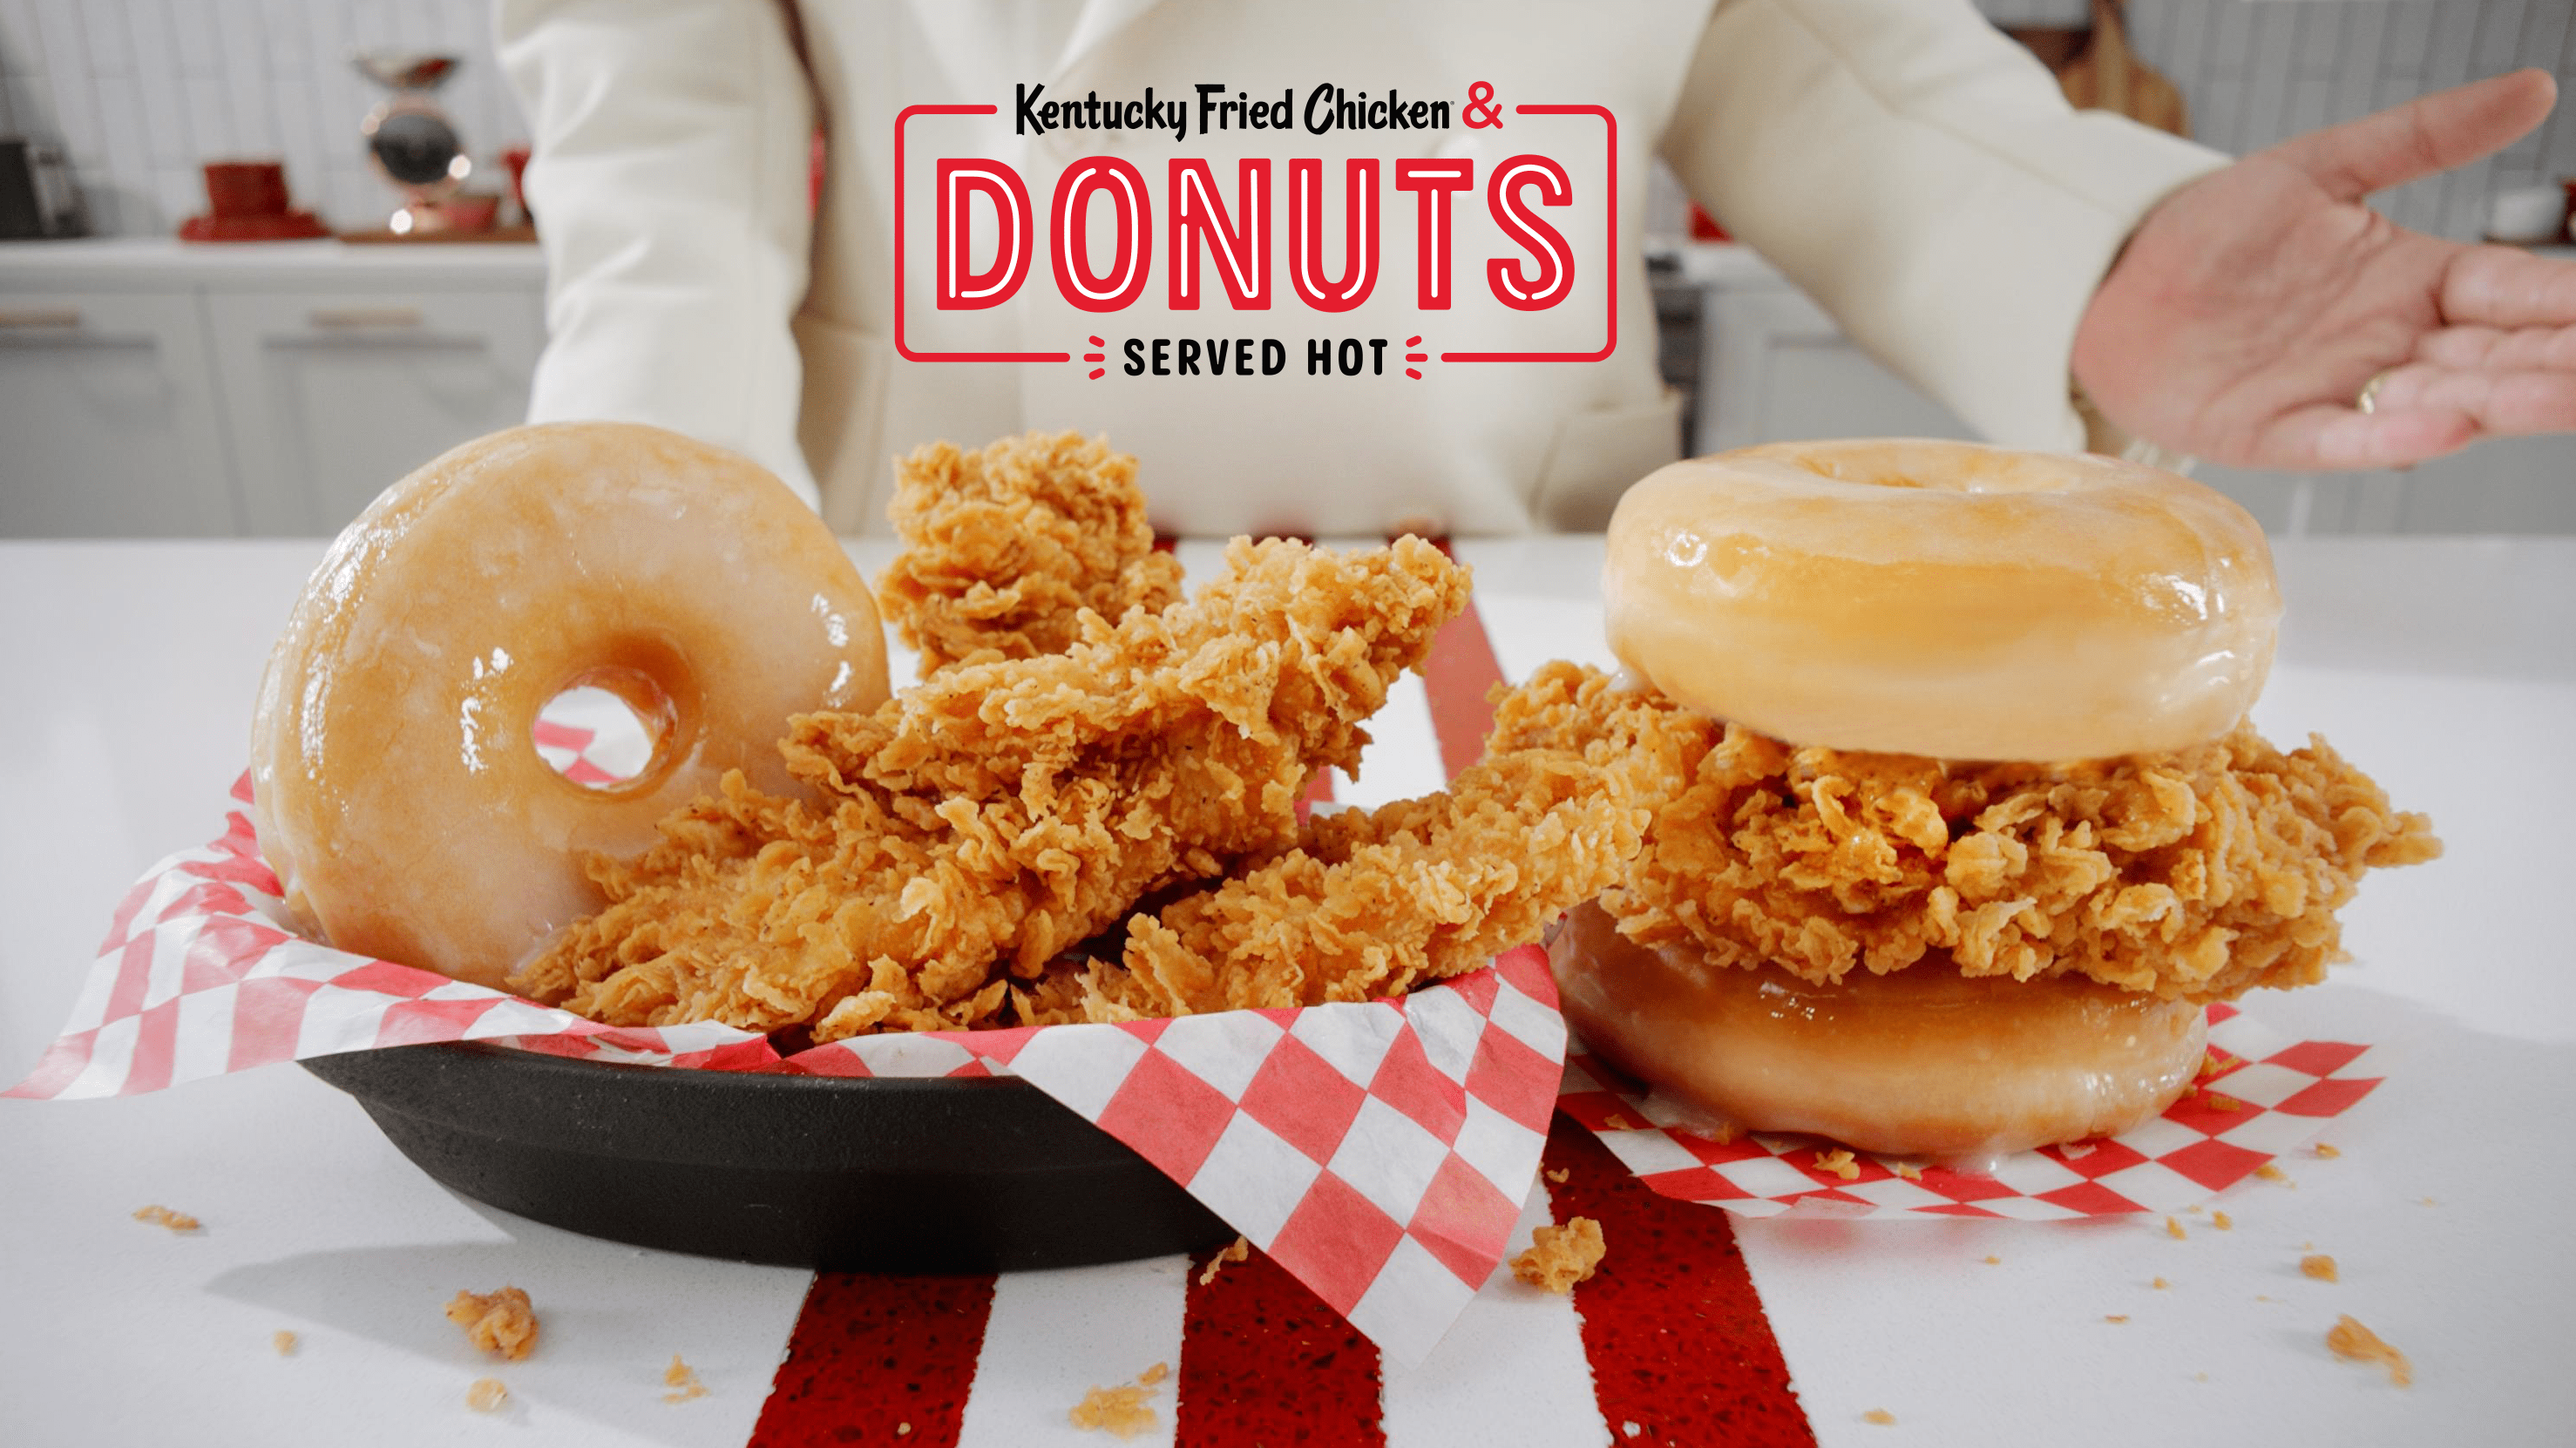 Kfc Releasing Its Fried Chicken And Donut Sandwich Nationwide 98